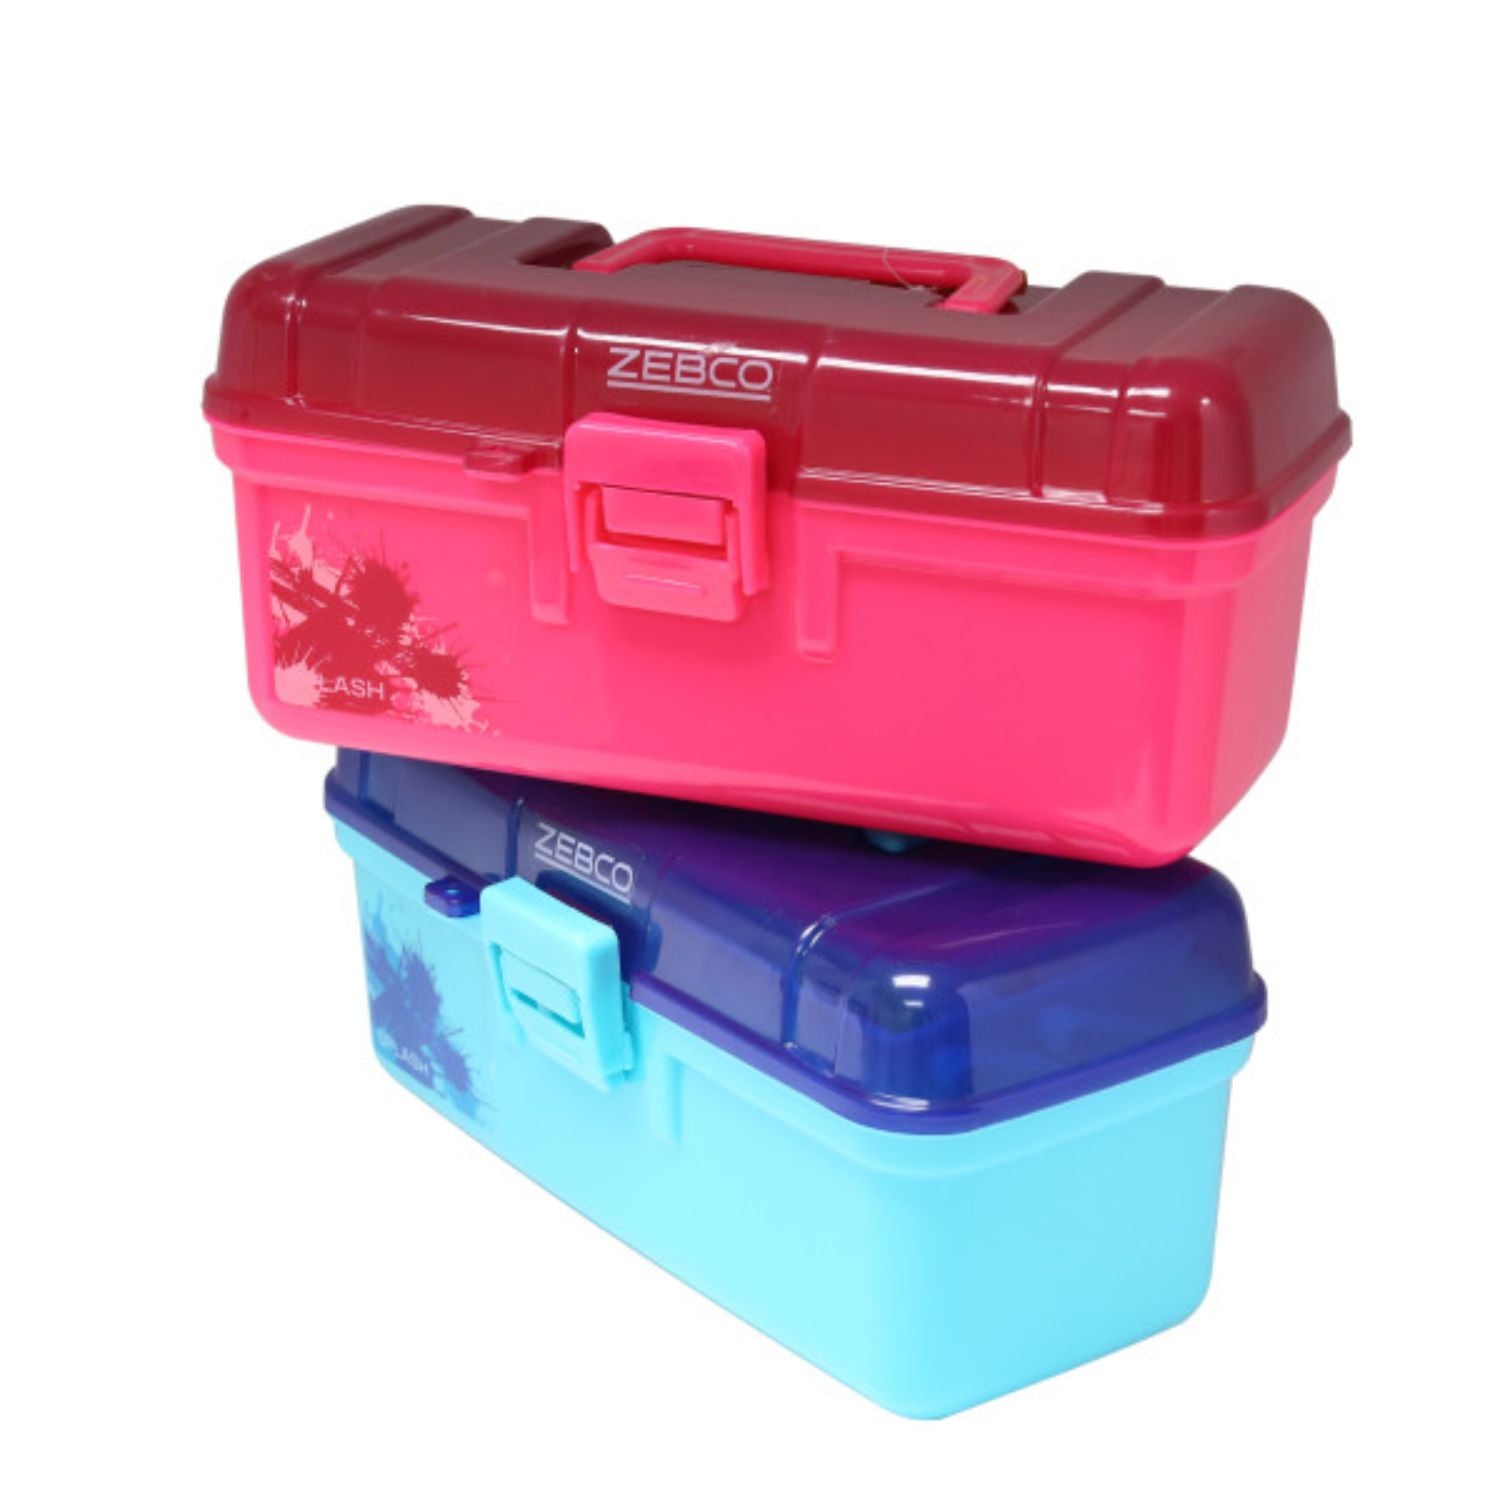 Zebco Splash Tackle Box ASST Blue and Pink With ASST Tackle – The Infidel Co